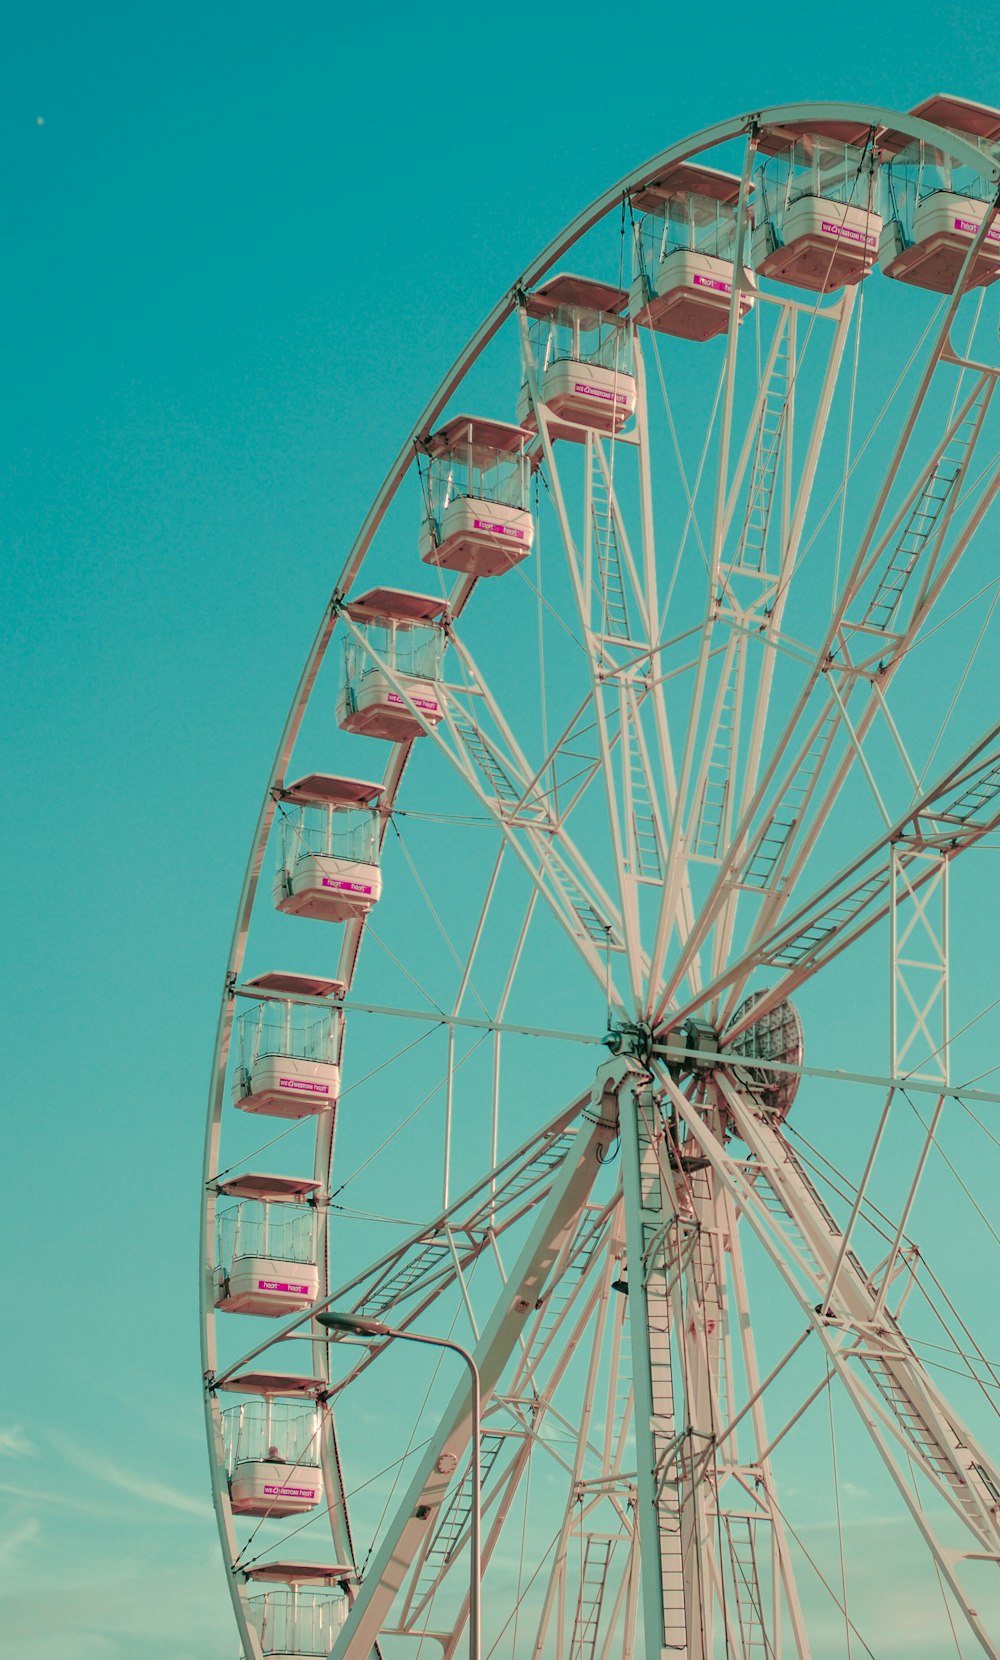 photo of red and white Ferris wheel during daytime